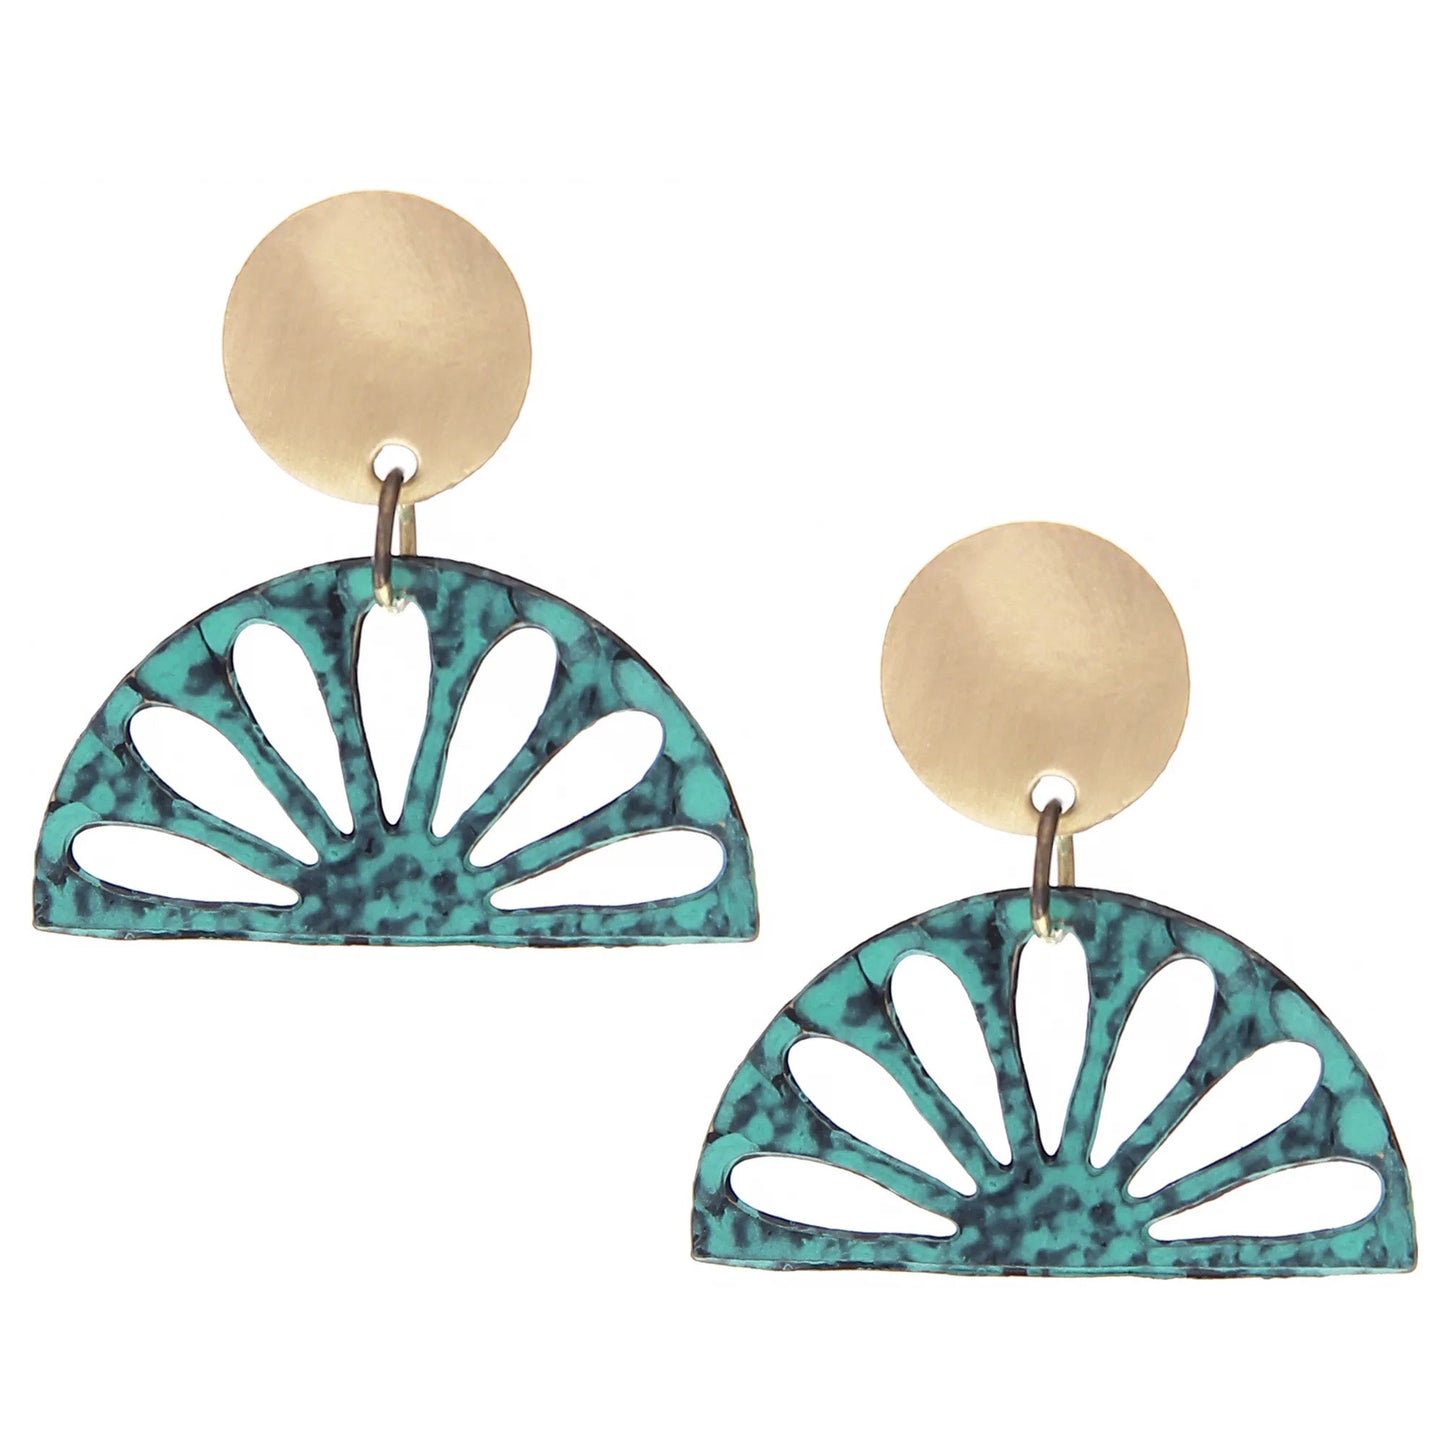 Brass disc stud earrings with semi-circular pendants attached underneath at the rounded edge. The semi-circle pendants have cut outs to look like a rising sun or flower shape.